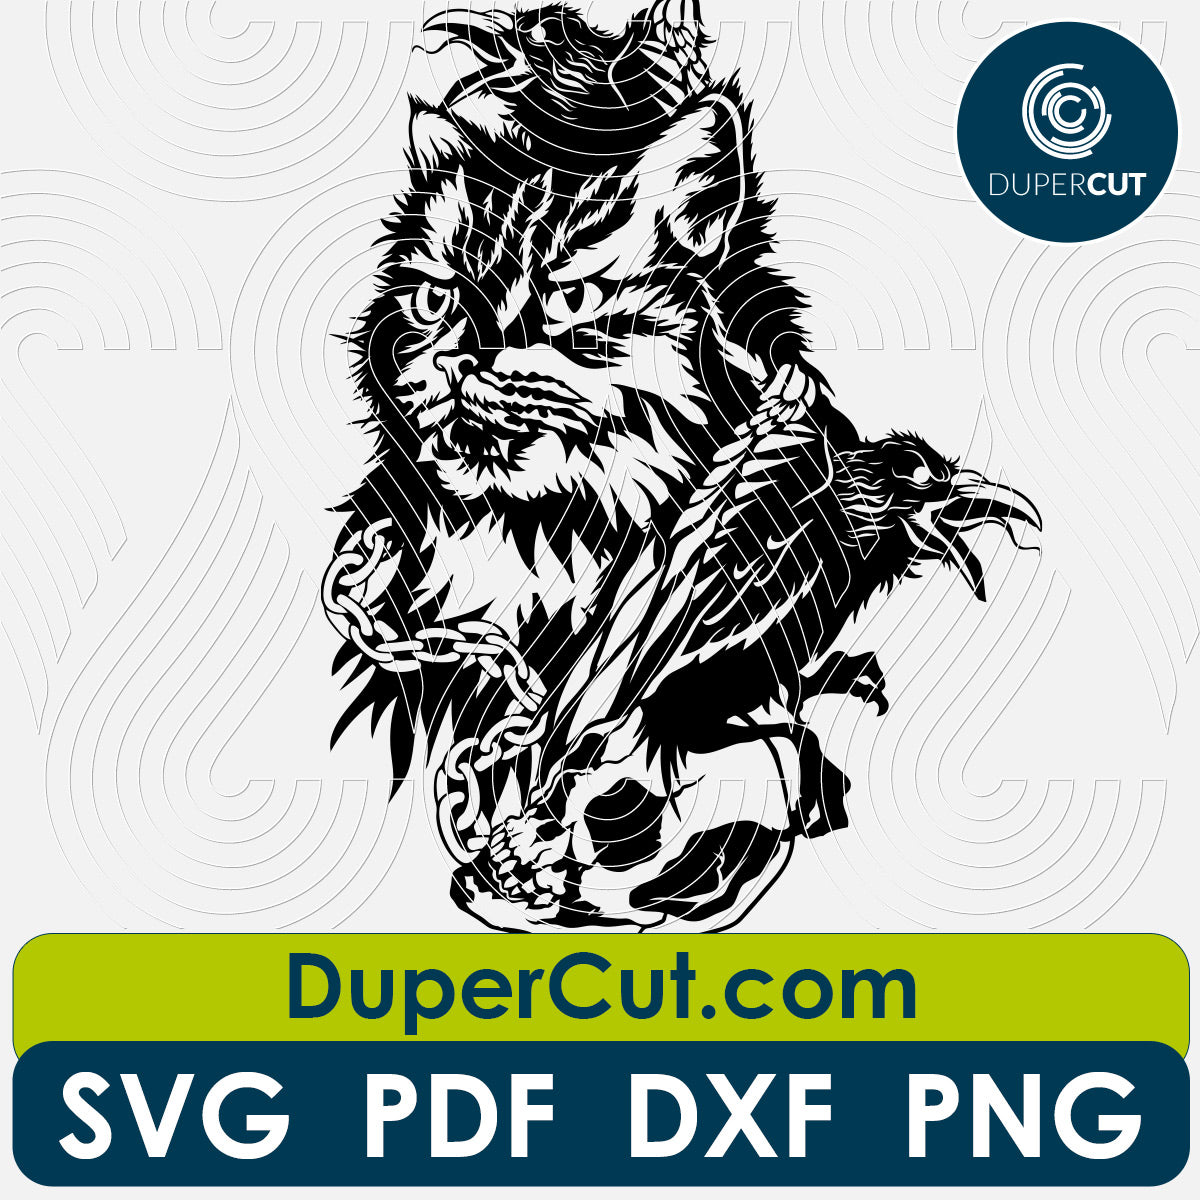 Papercutting Template - Black Cat with Skull, Paper Cutting Template, steampunk skull SVG PNG DXF cutting files for Cricut, Glowforge, Silhouette cameo, laser engraving